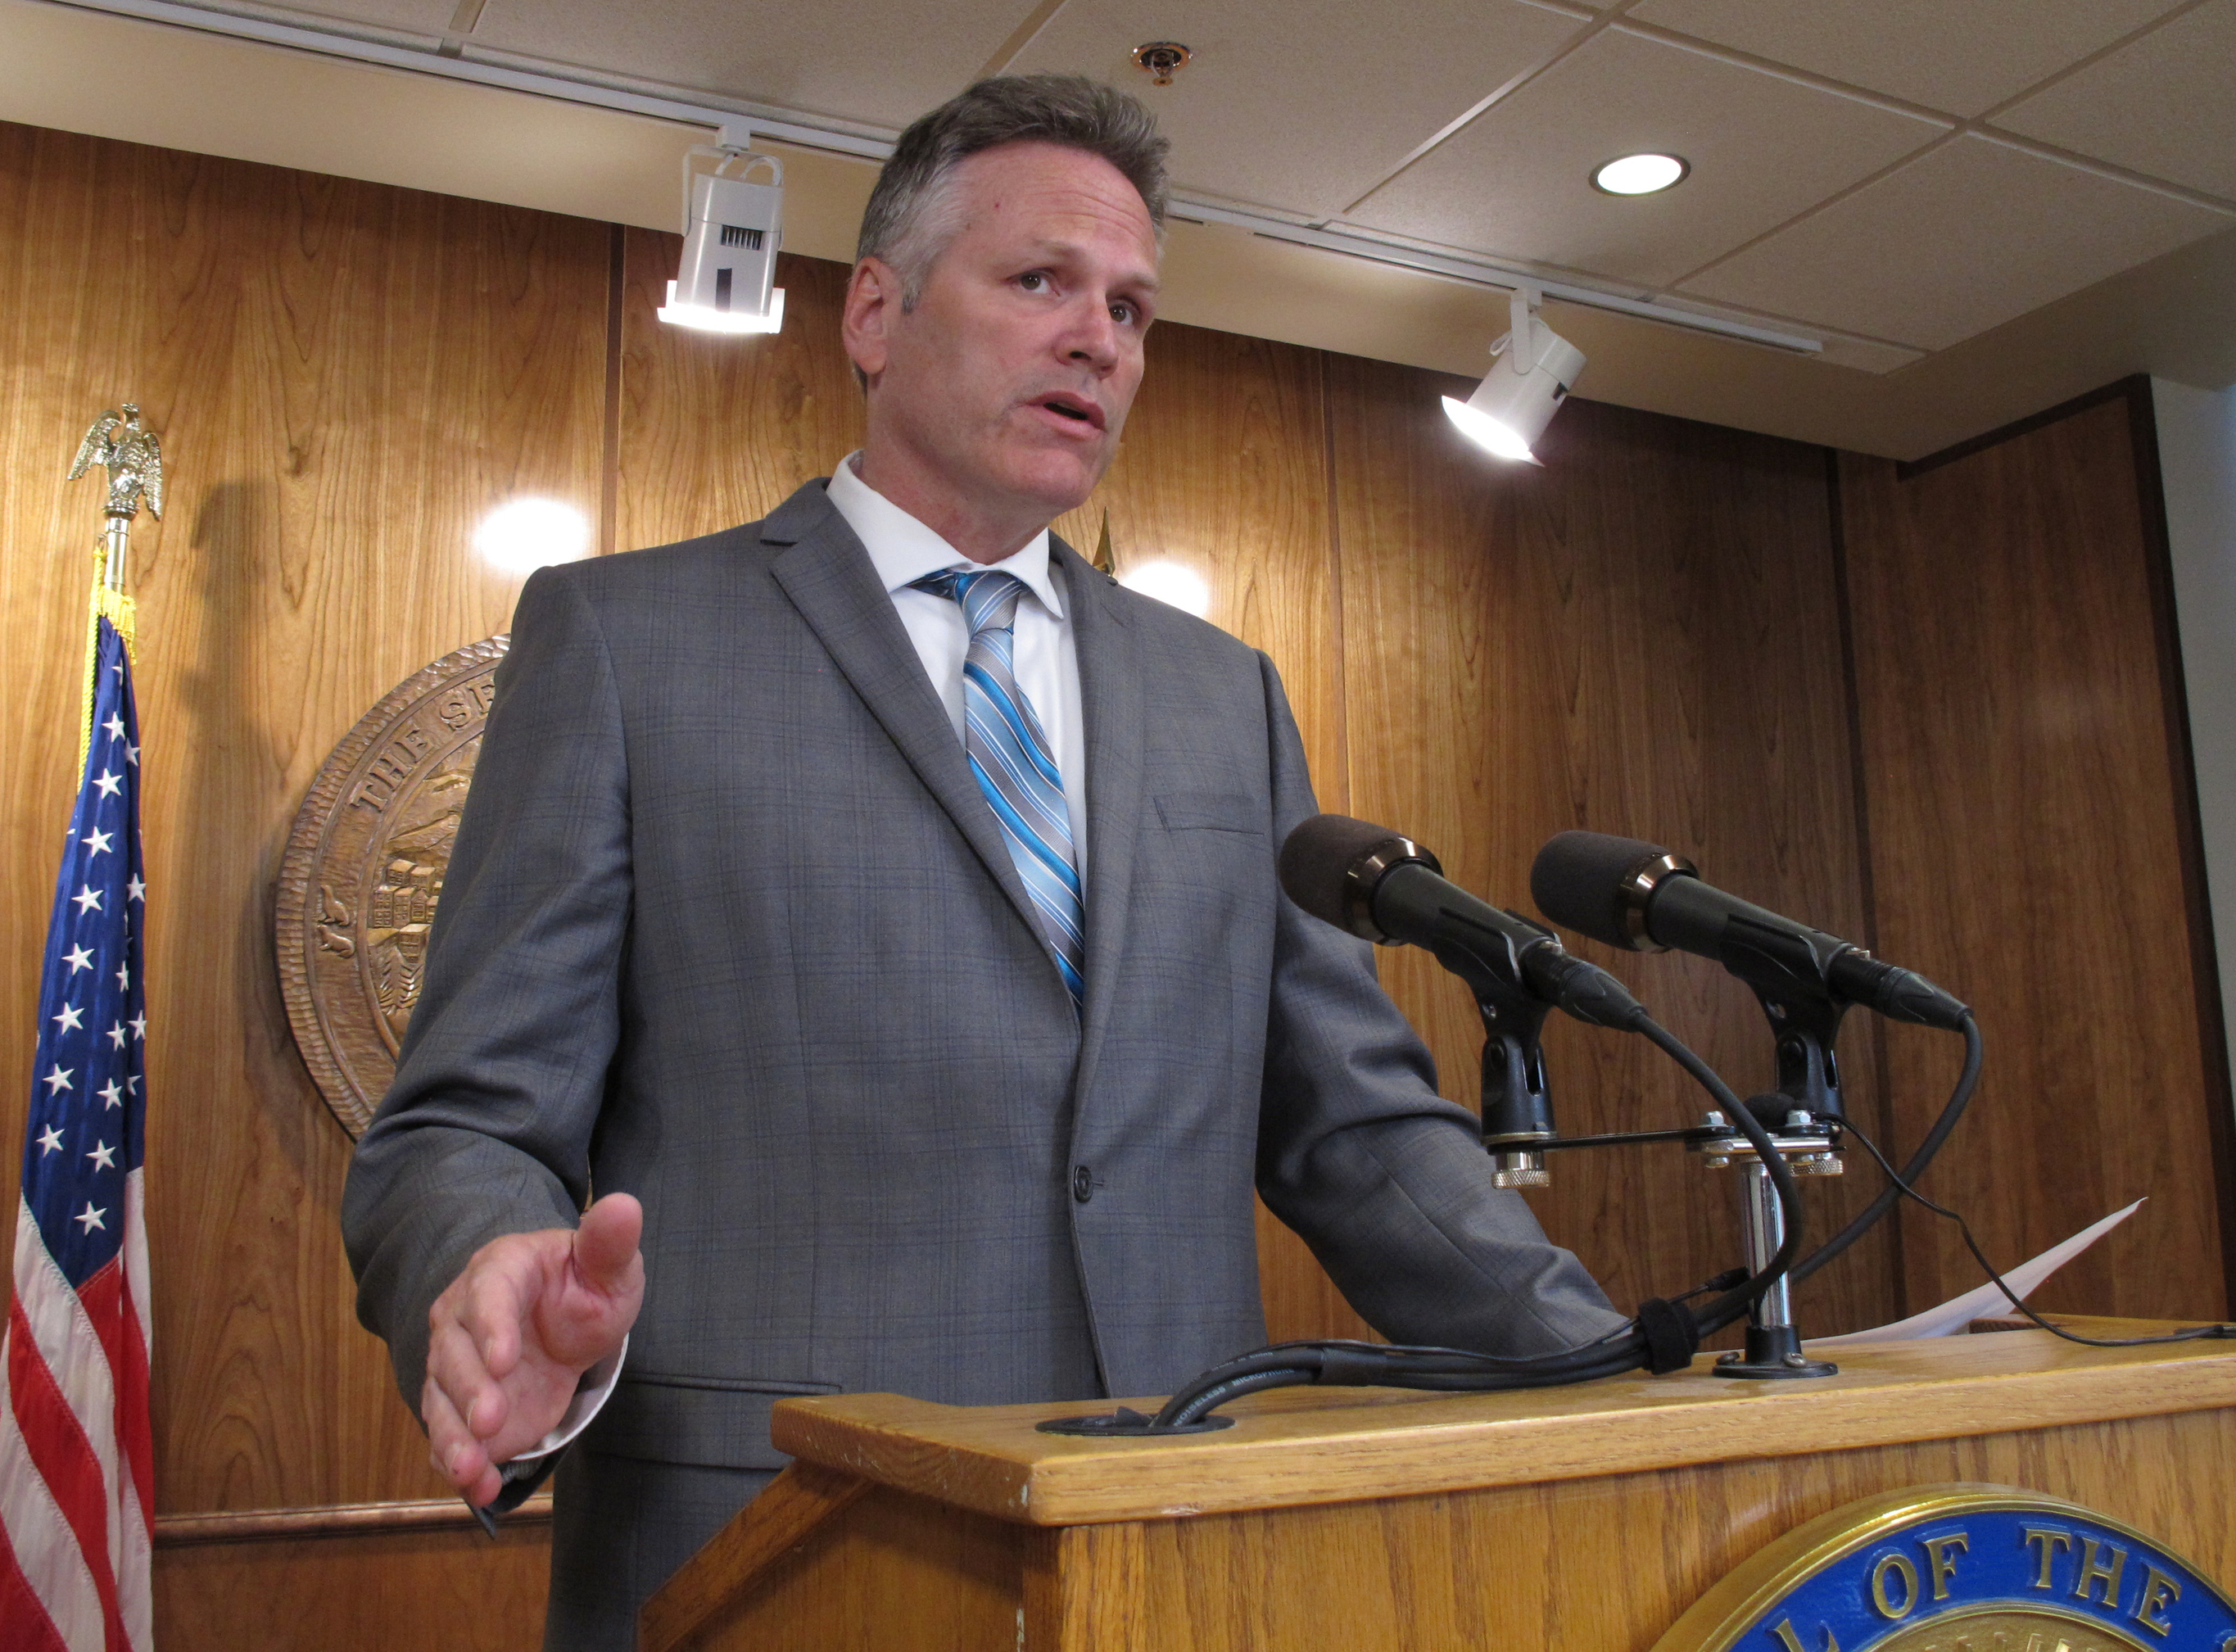 Alaska Gov. Mike Dunleavy speaks to reporters about his budget vetoes at the state Capitol in Juneau, Alaska Friday, June 28, 2019. The university system, health and social service programs and public broadcasting were among the areas affected by vetoes. The budget agreed to by the House and Senate cut state support for the university system by a fraction of what Dunleavy proposed. Lawmakers have the ability to override budget vetoes if they can muster sufficient support. (Becky Bohrer—AP)